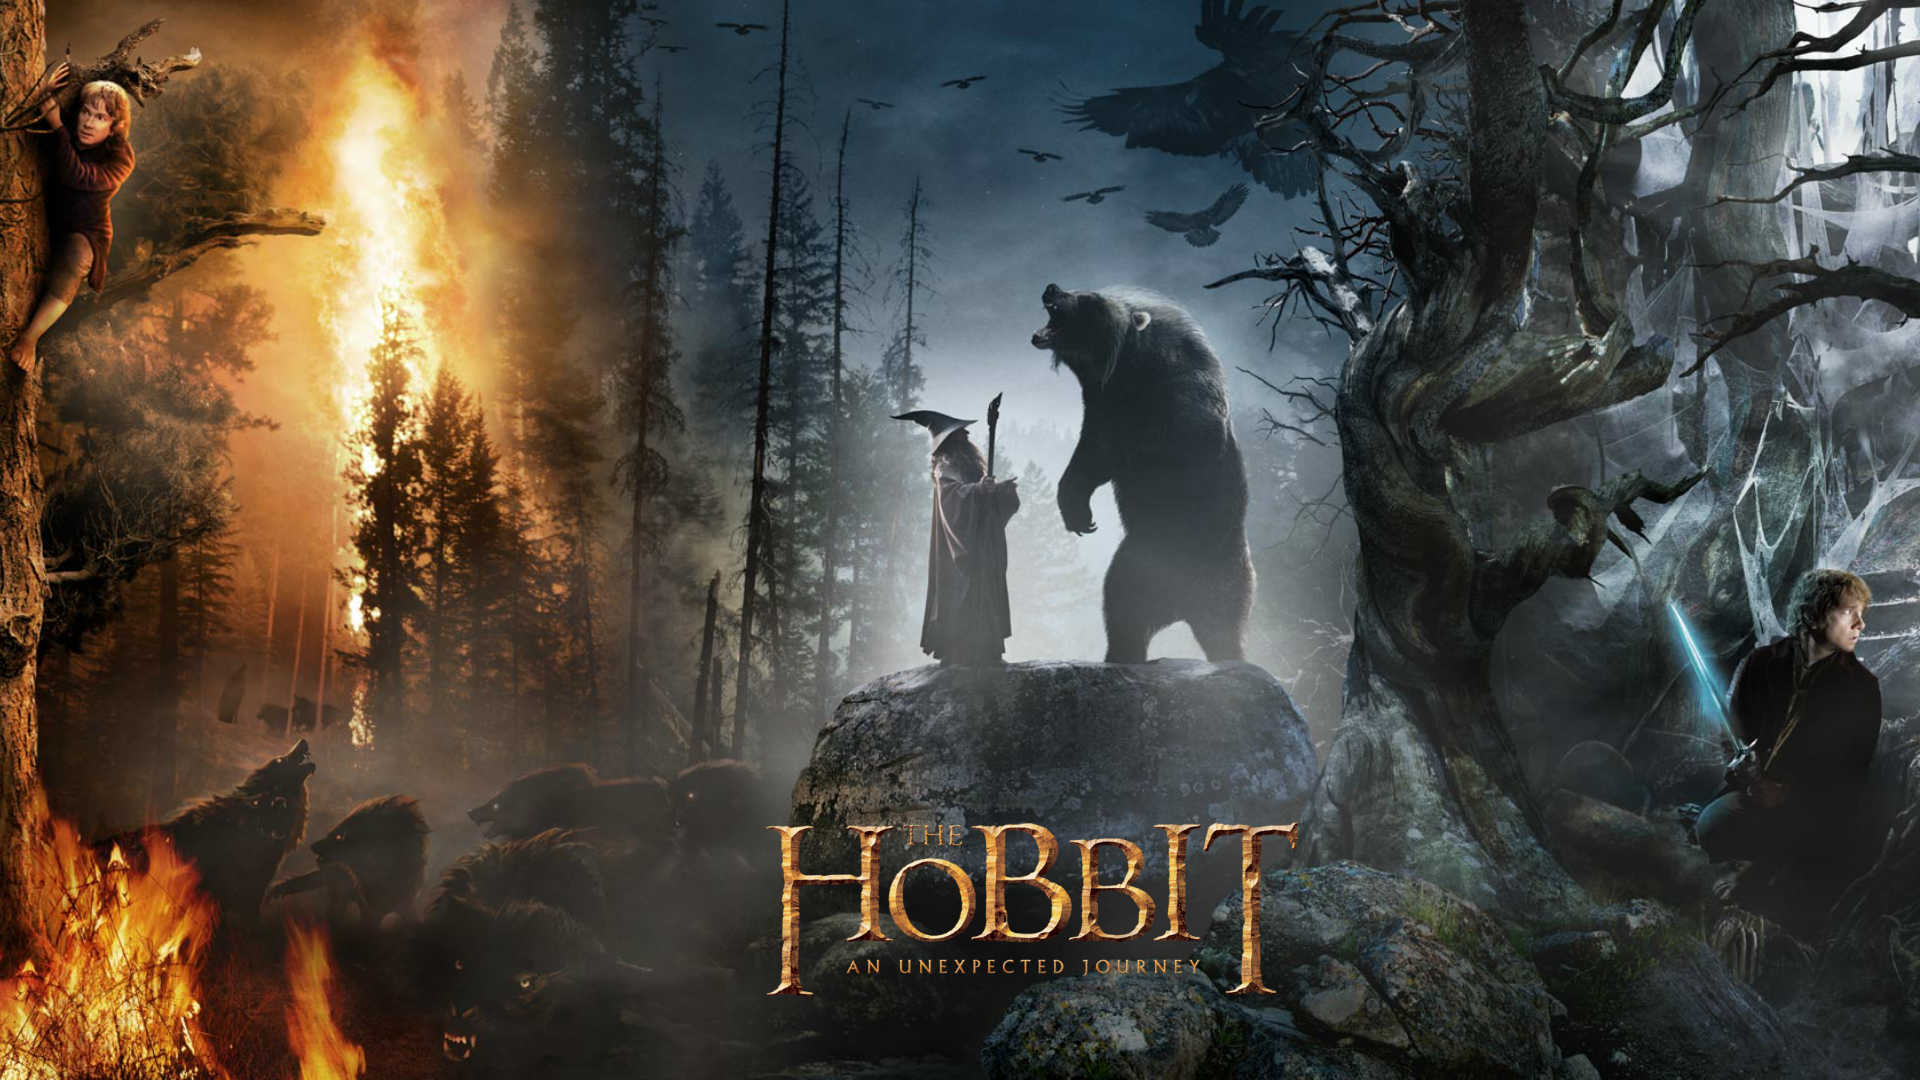 The Hobbit 2012 Movie Wallpapers HD Wallpapers 1920x1080